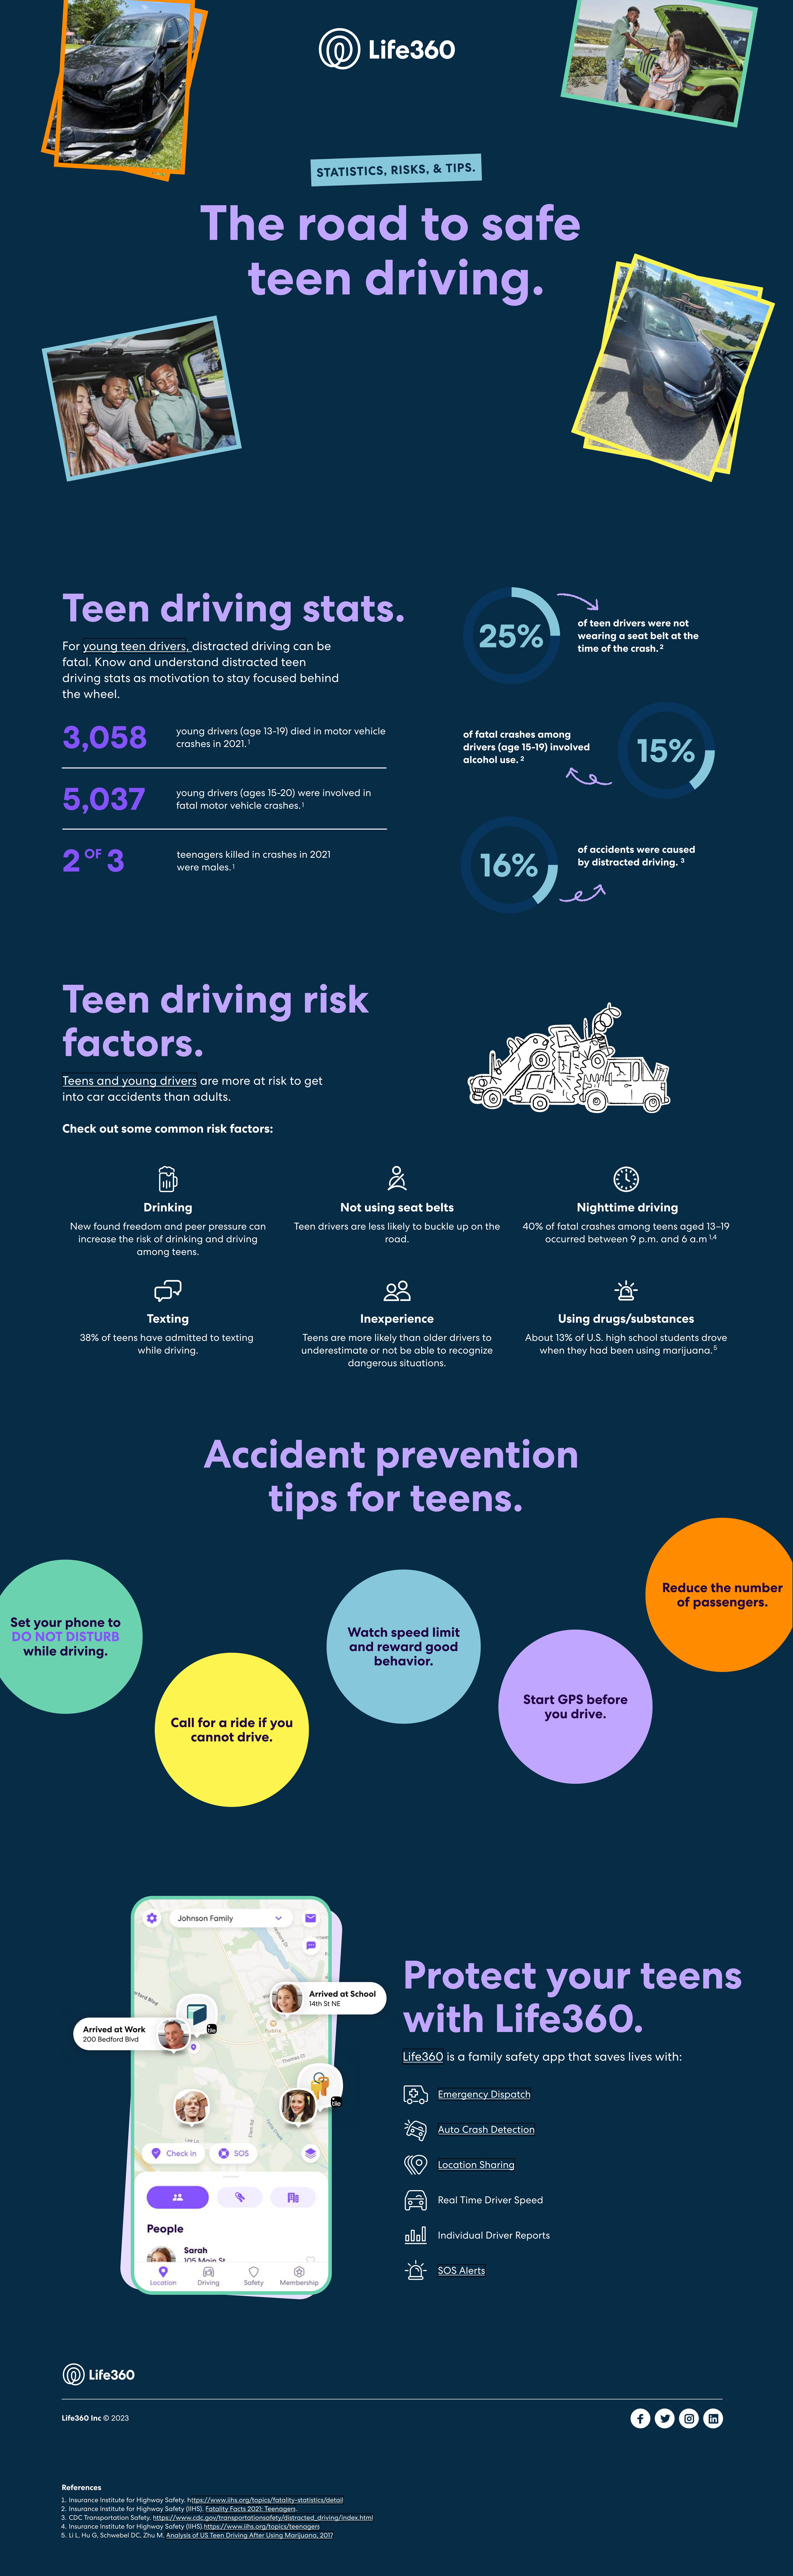 Driving Safety infographic with details outlined in blog content